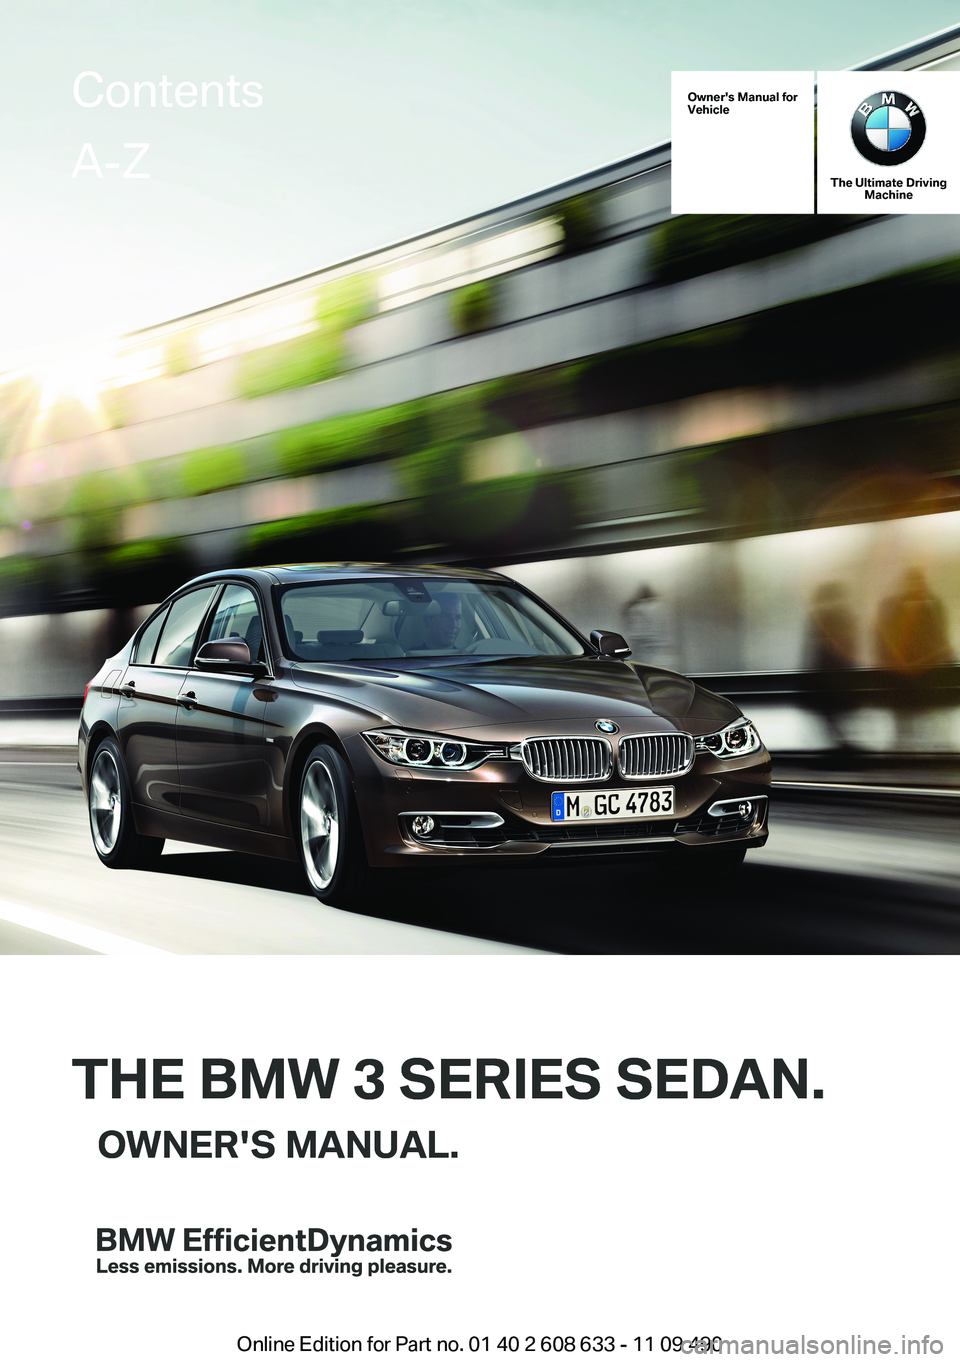 BMW 335I 2012  Owners Manual Owner's Manual forVehicle
THE BMW 3 SERIES SEDAN.OWNER'S MANUAL.
The Ultimate DrivingMachine
THE BMW 3 SERIES SEDAN.OWNER'S MANUAL.
ContentsA-Z
Online Edition for Part no. 01 40 2 608 633 